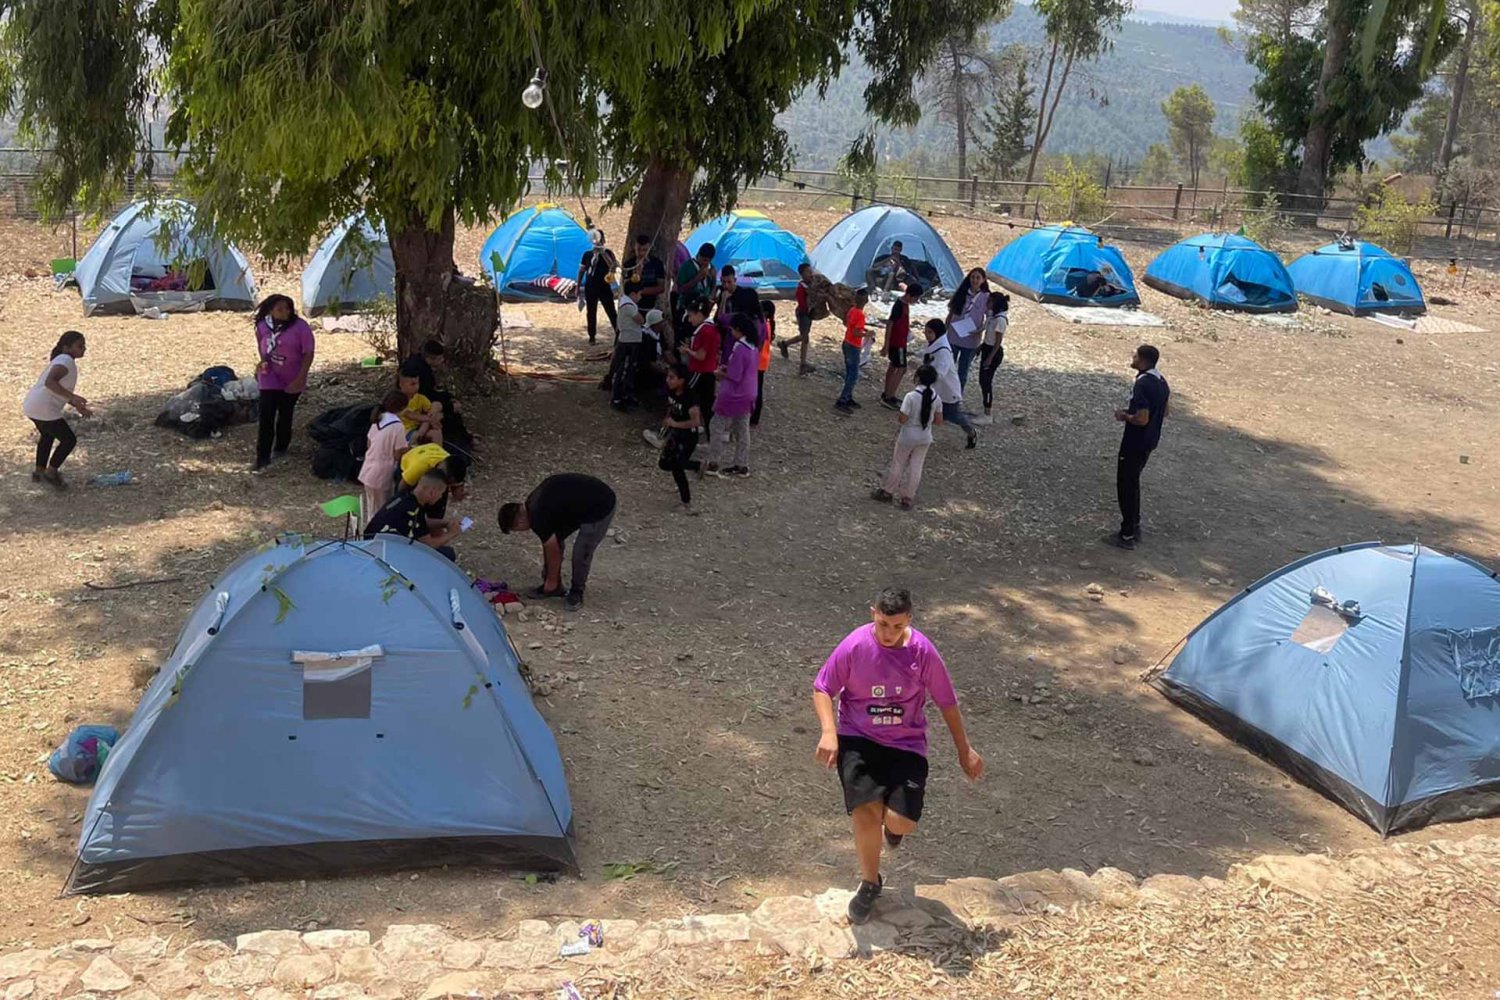 Campers learn to pitch their own tents during “Silwan Summer 2022,” a youth camp for the al-Bustan district scout group, 2022